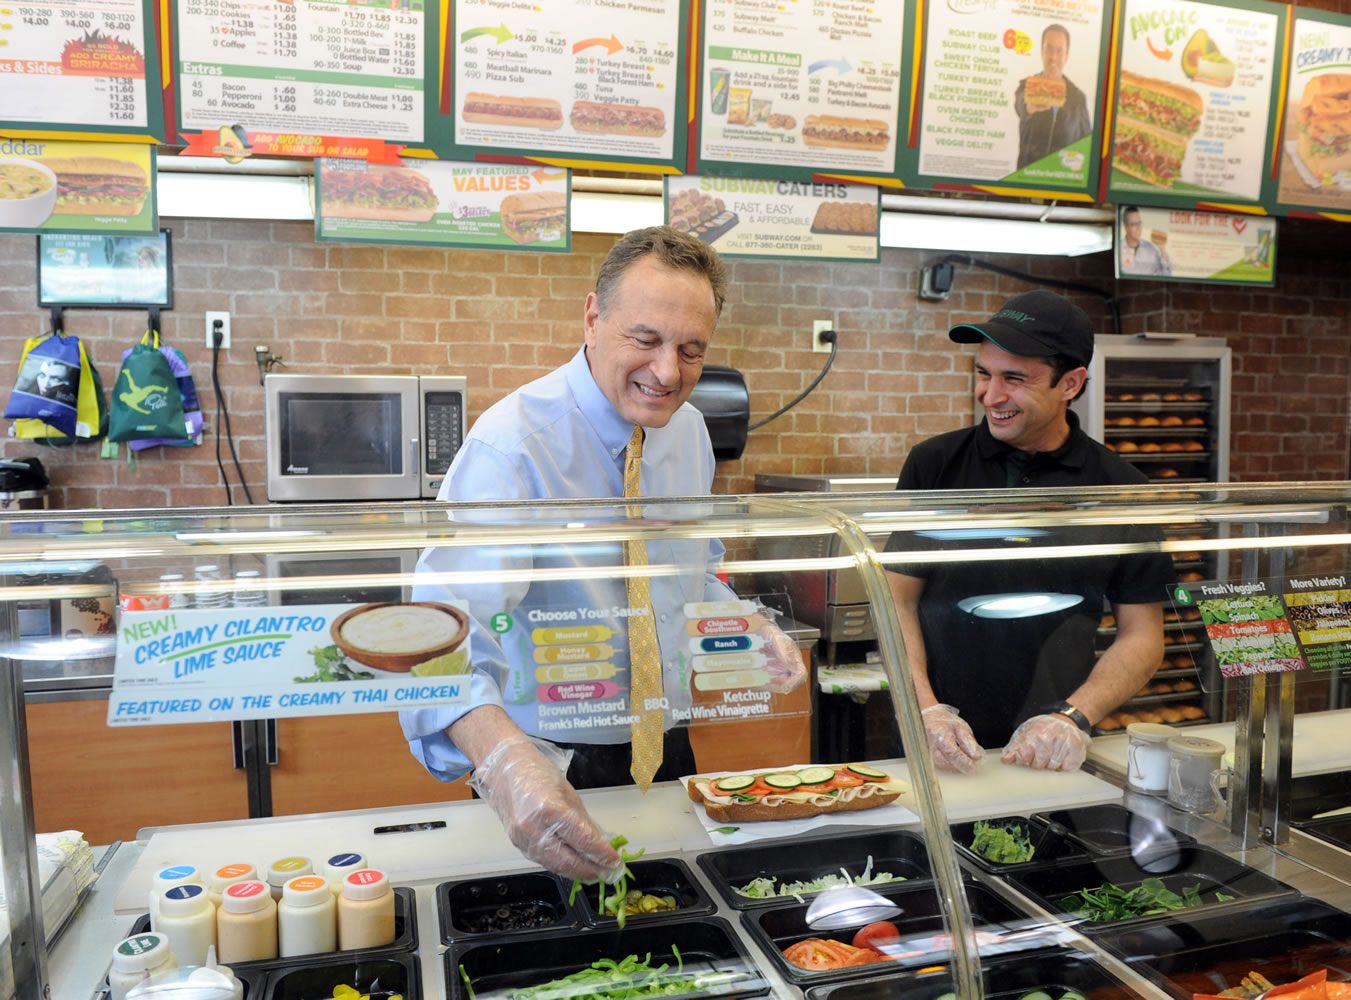 Fred DeLuca, left, co-founder and CEO of Subway, works behind the counter Tuesday at a Subway in New York.